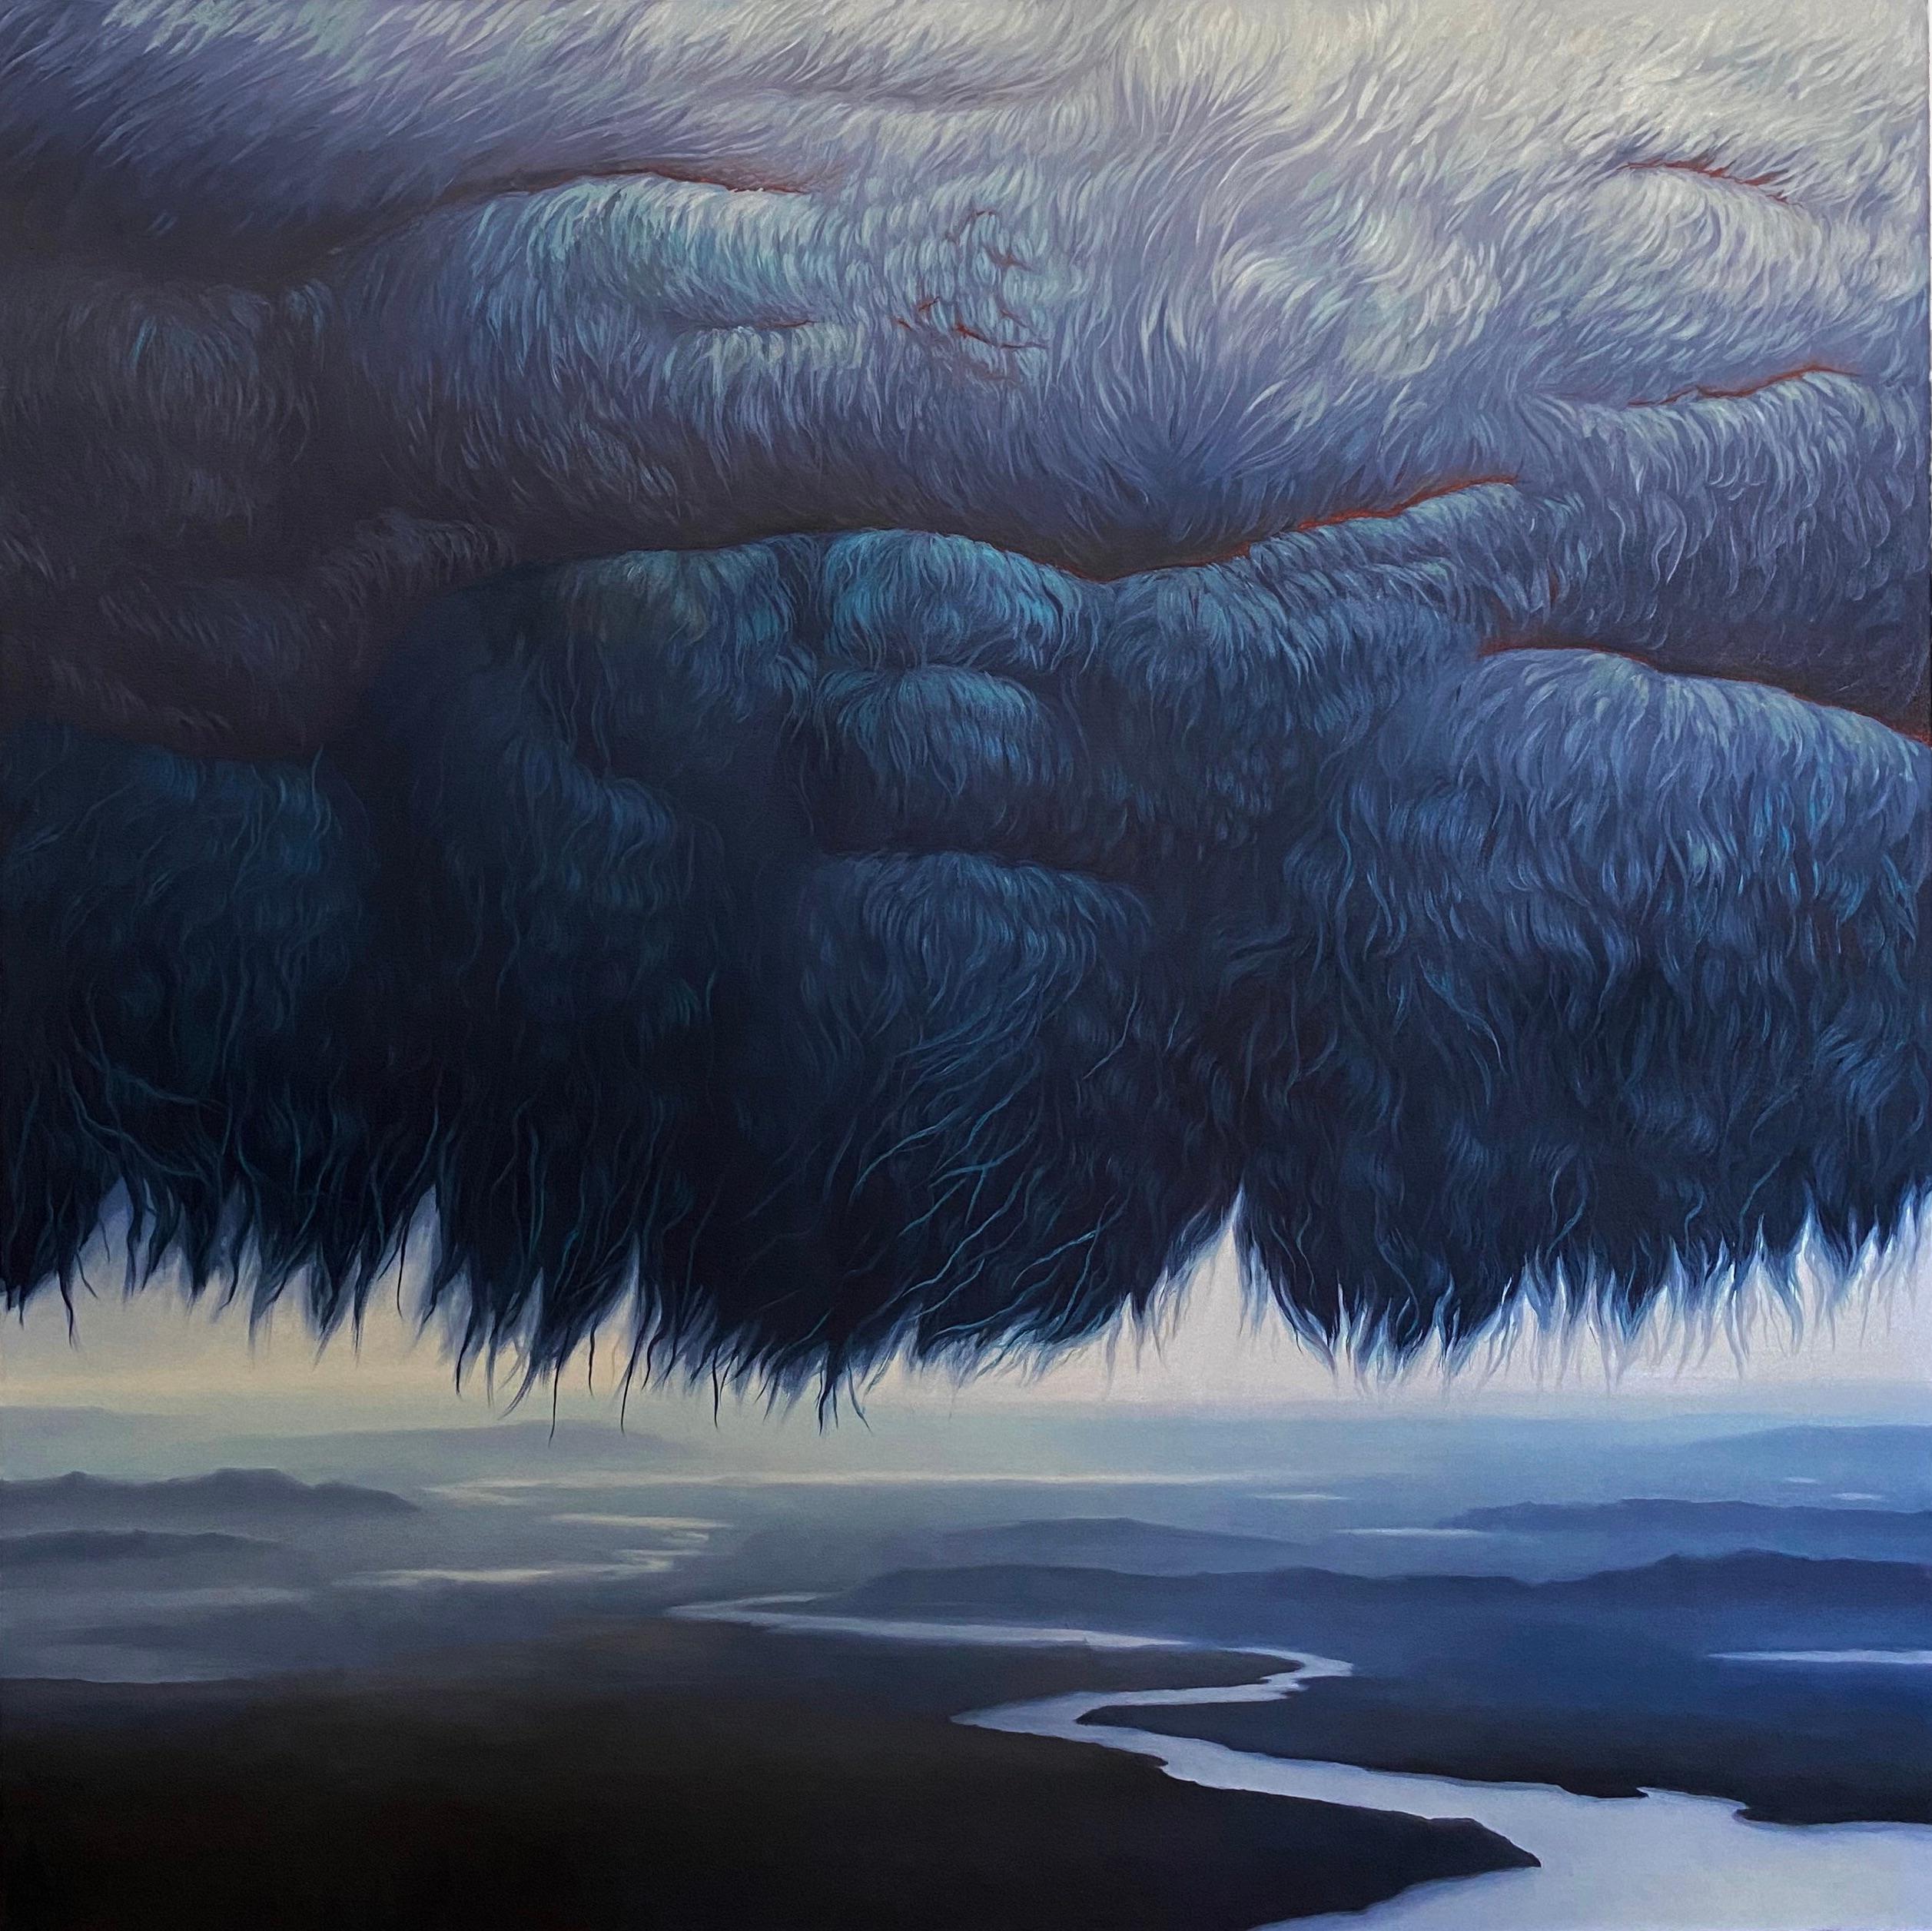 At the Threshold of Sleep - Painting by Ashley Eliza Williams